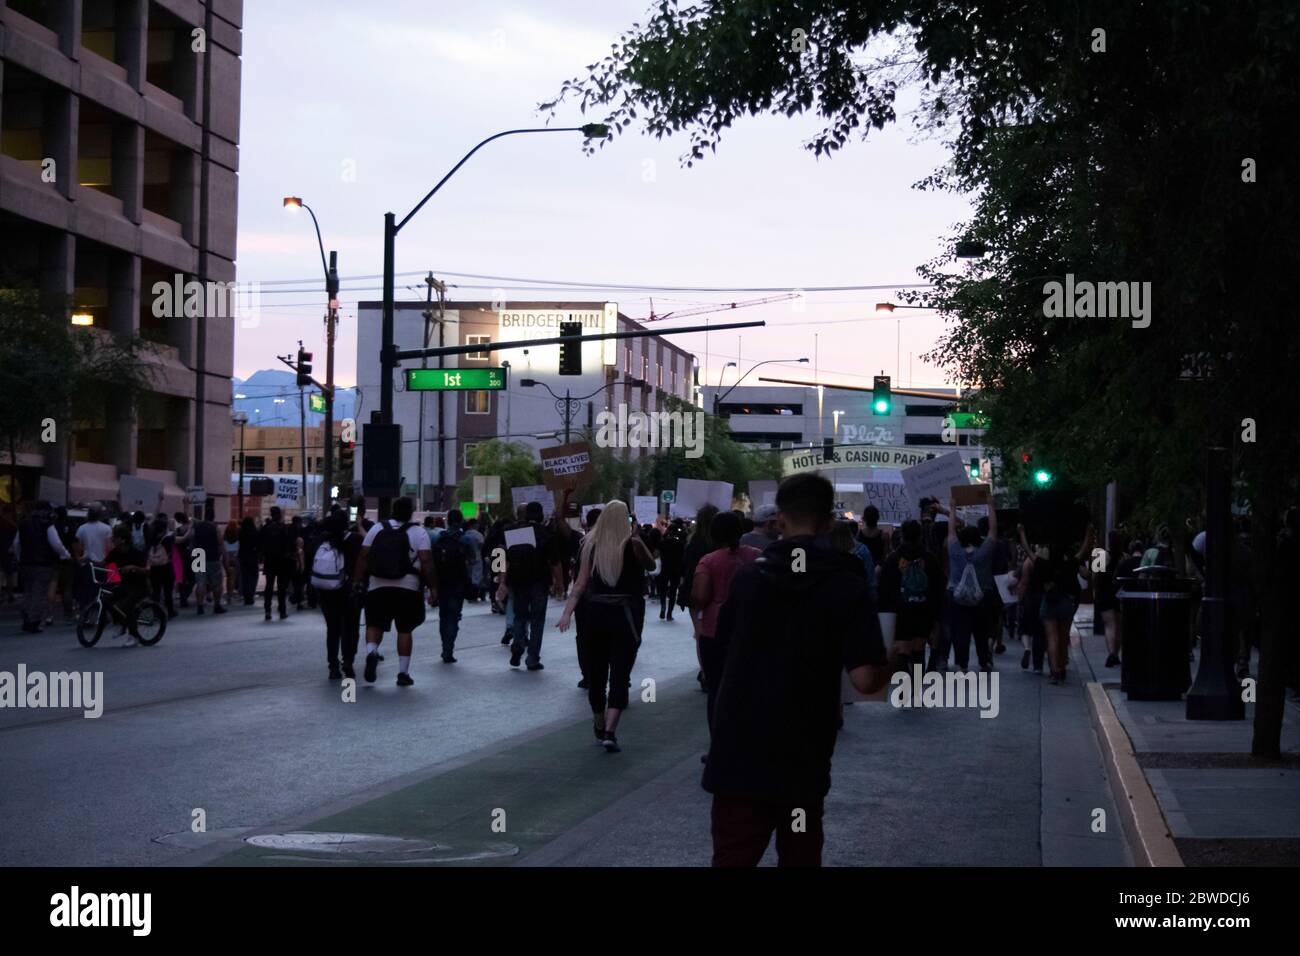 Las Vegas, NV - May 30, 2020: Protesters gather to protest and march in a nationwide call for changes in the police departments across the country on May 30, 2020 in downtown Las Vegas, Nevada. Credit: Shannon Beelman/The Photo Access Stock Photo